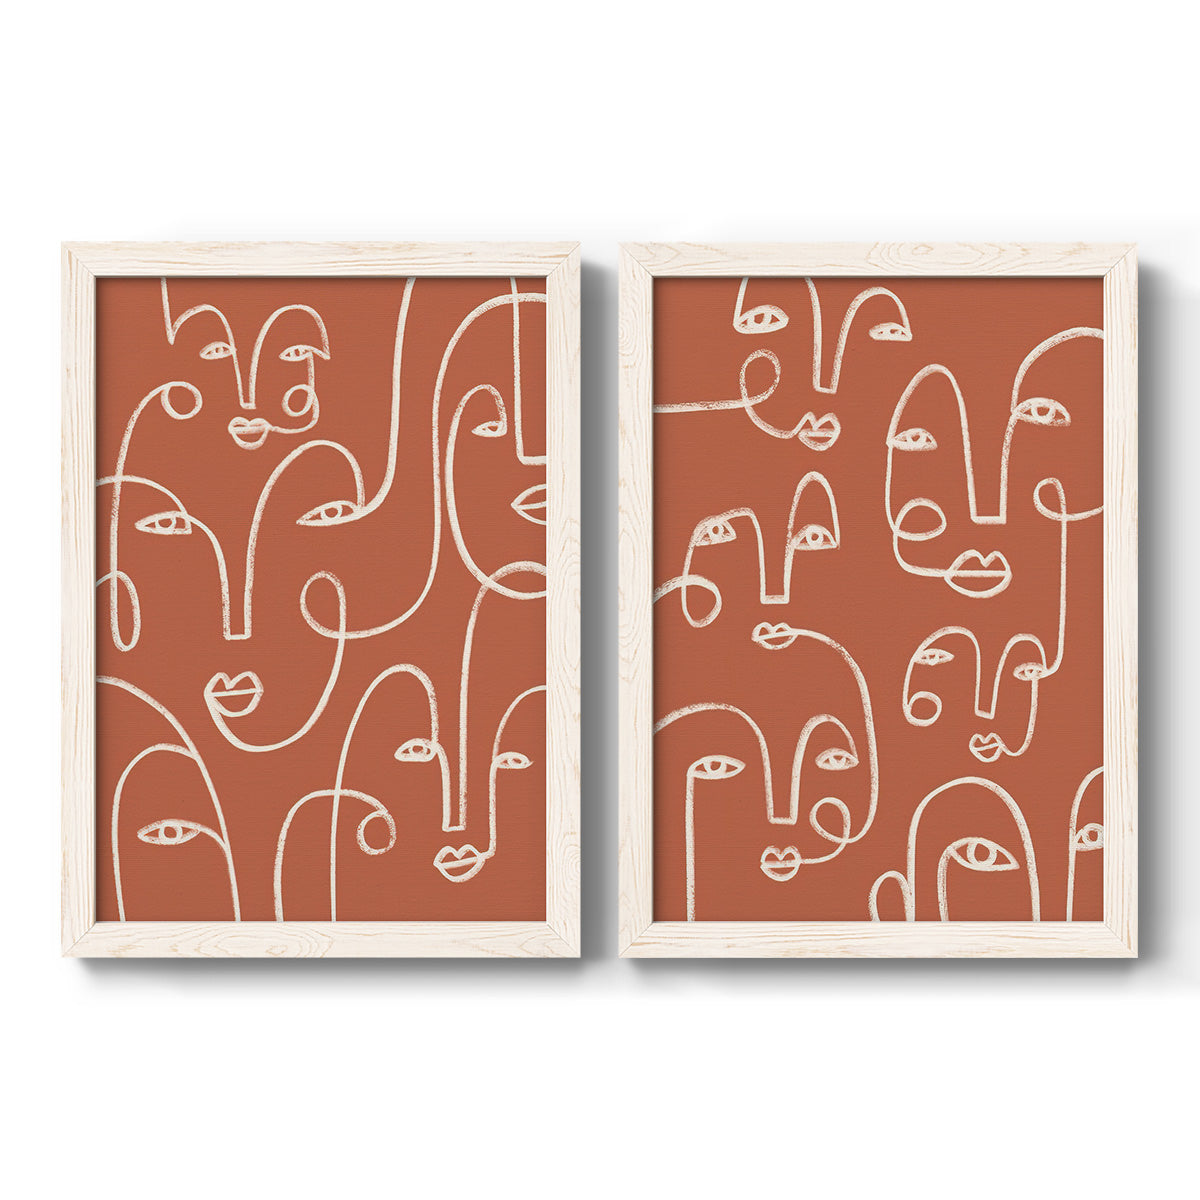 Connected Expressions I - Premium Framed Canvas 2 Piece Set - Ready to Hang